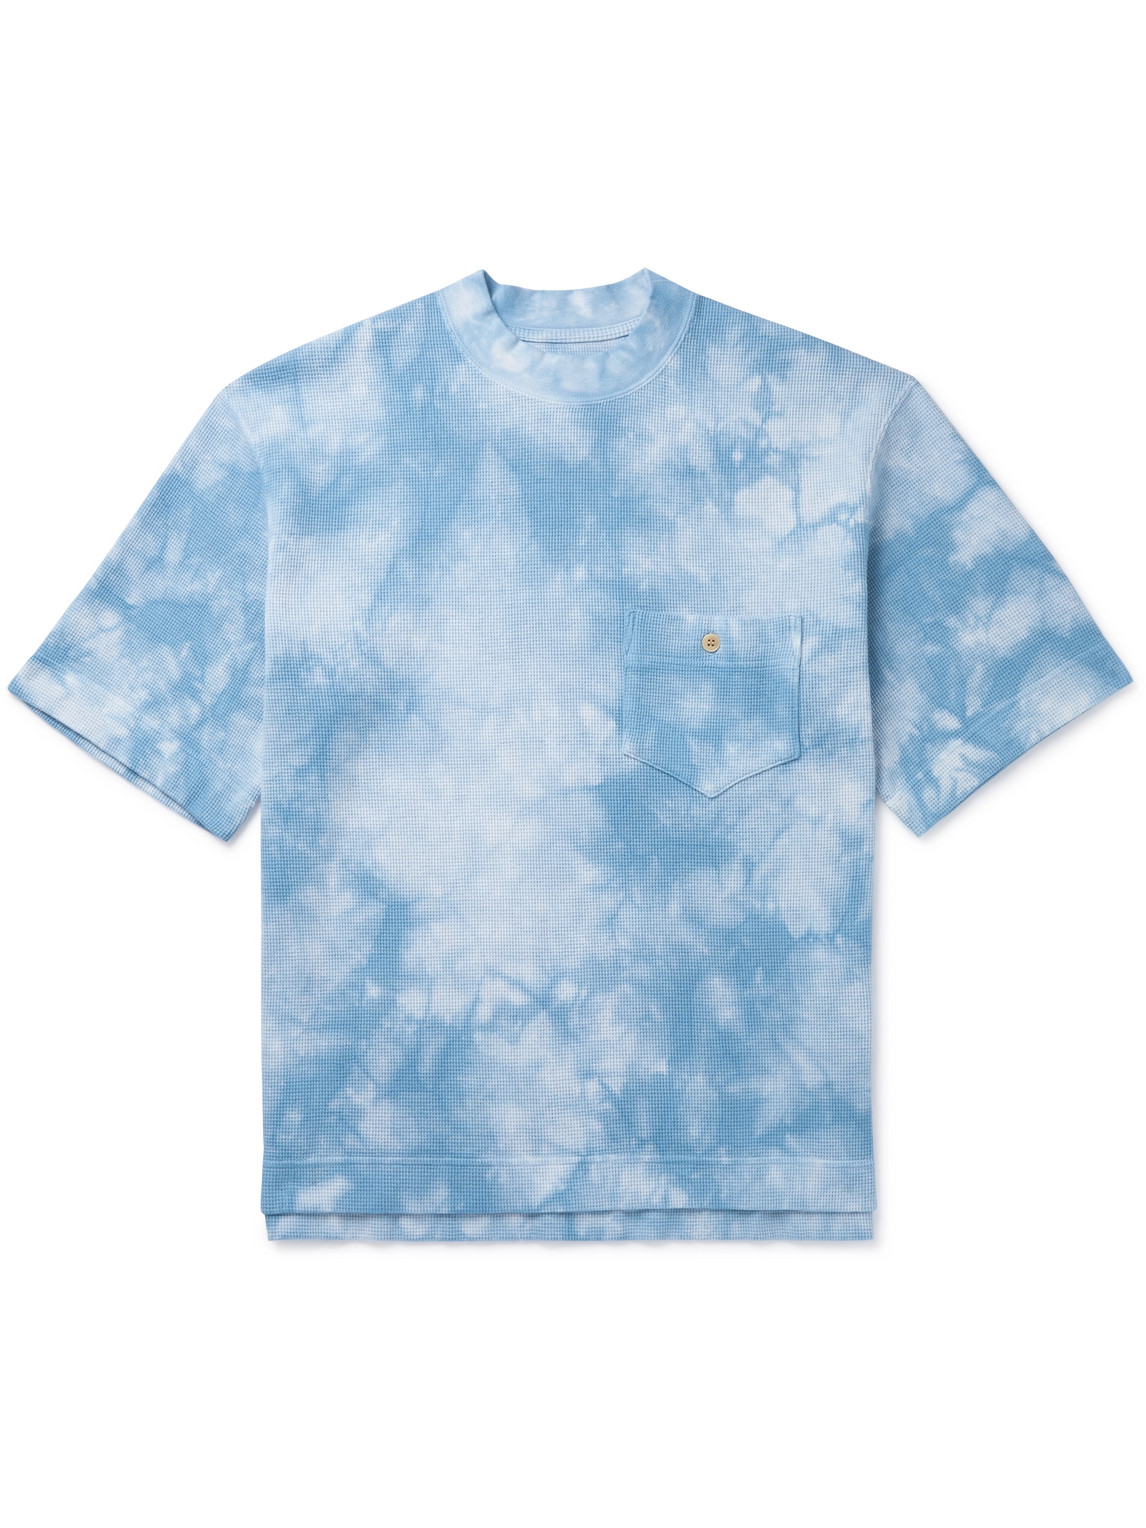 Nicholas Daley Tie-dyed Waffle-knit Cotton-blend T-shirt In Blue